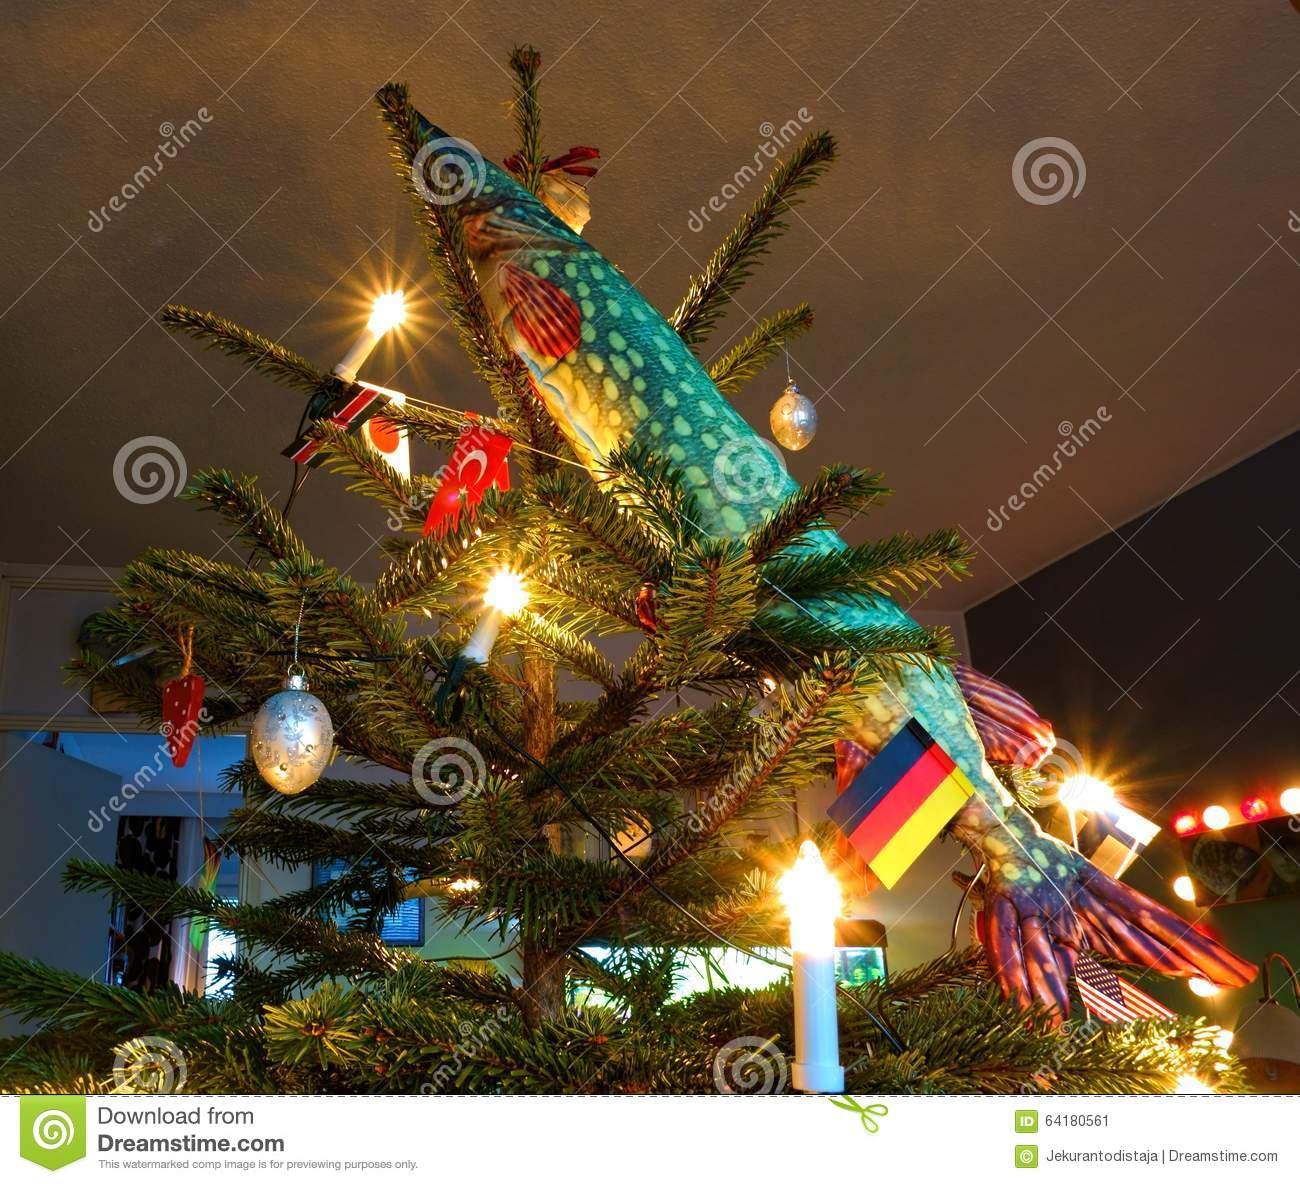 Fish And A Christmas Tree Stock Image Image Of Light 64180561 within dimensions 1300 X 1184